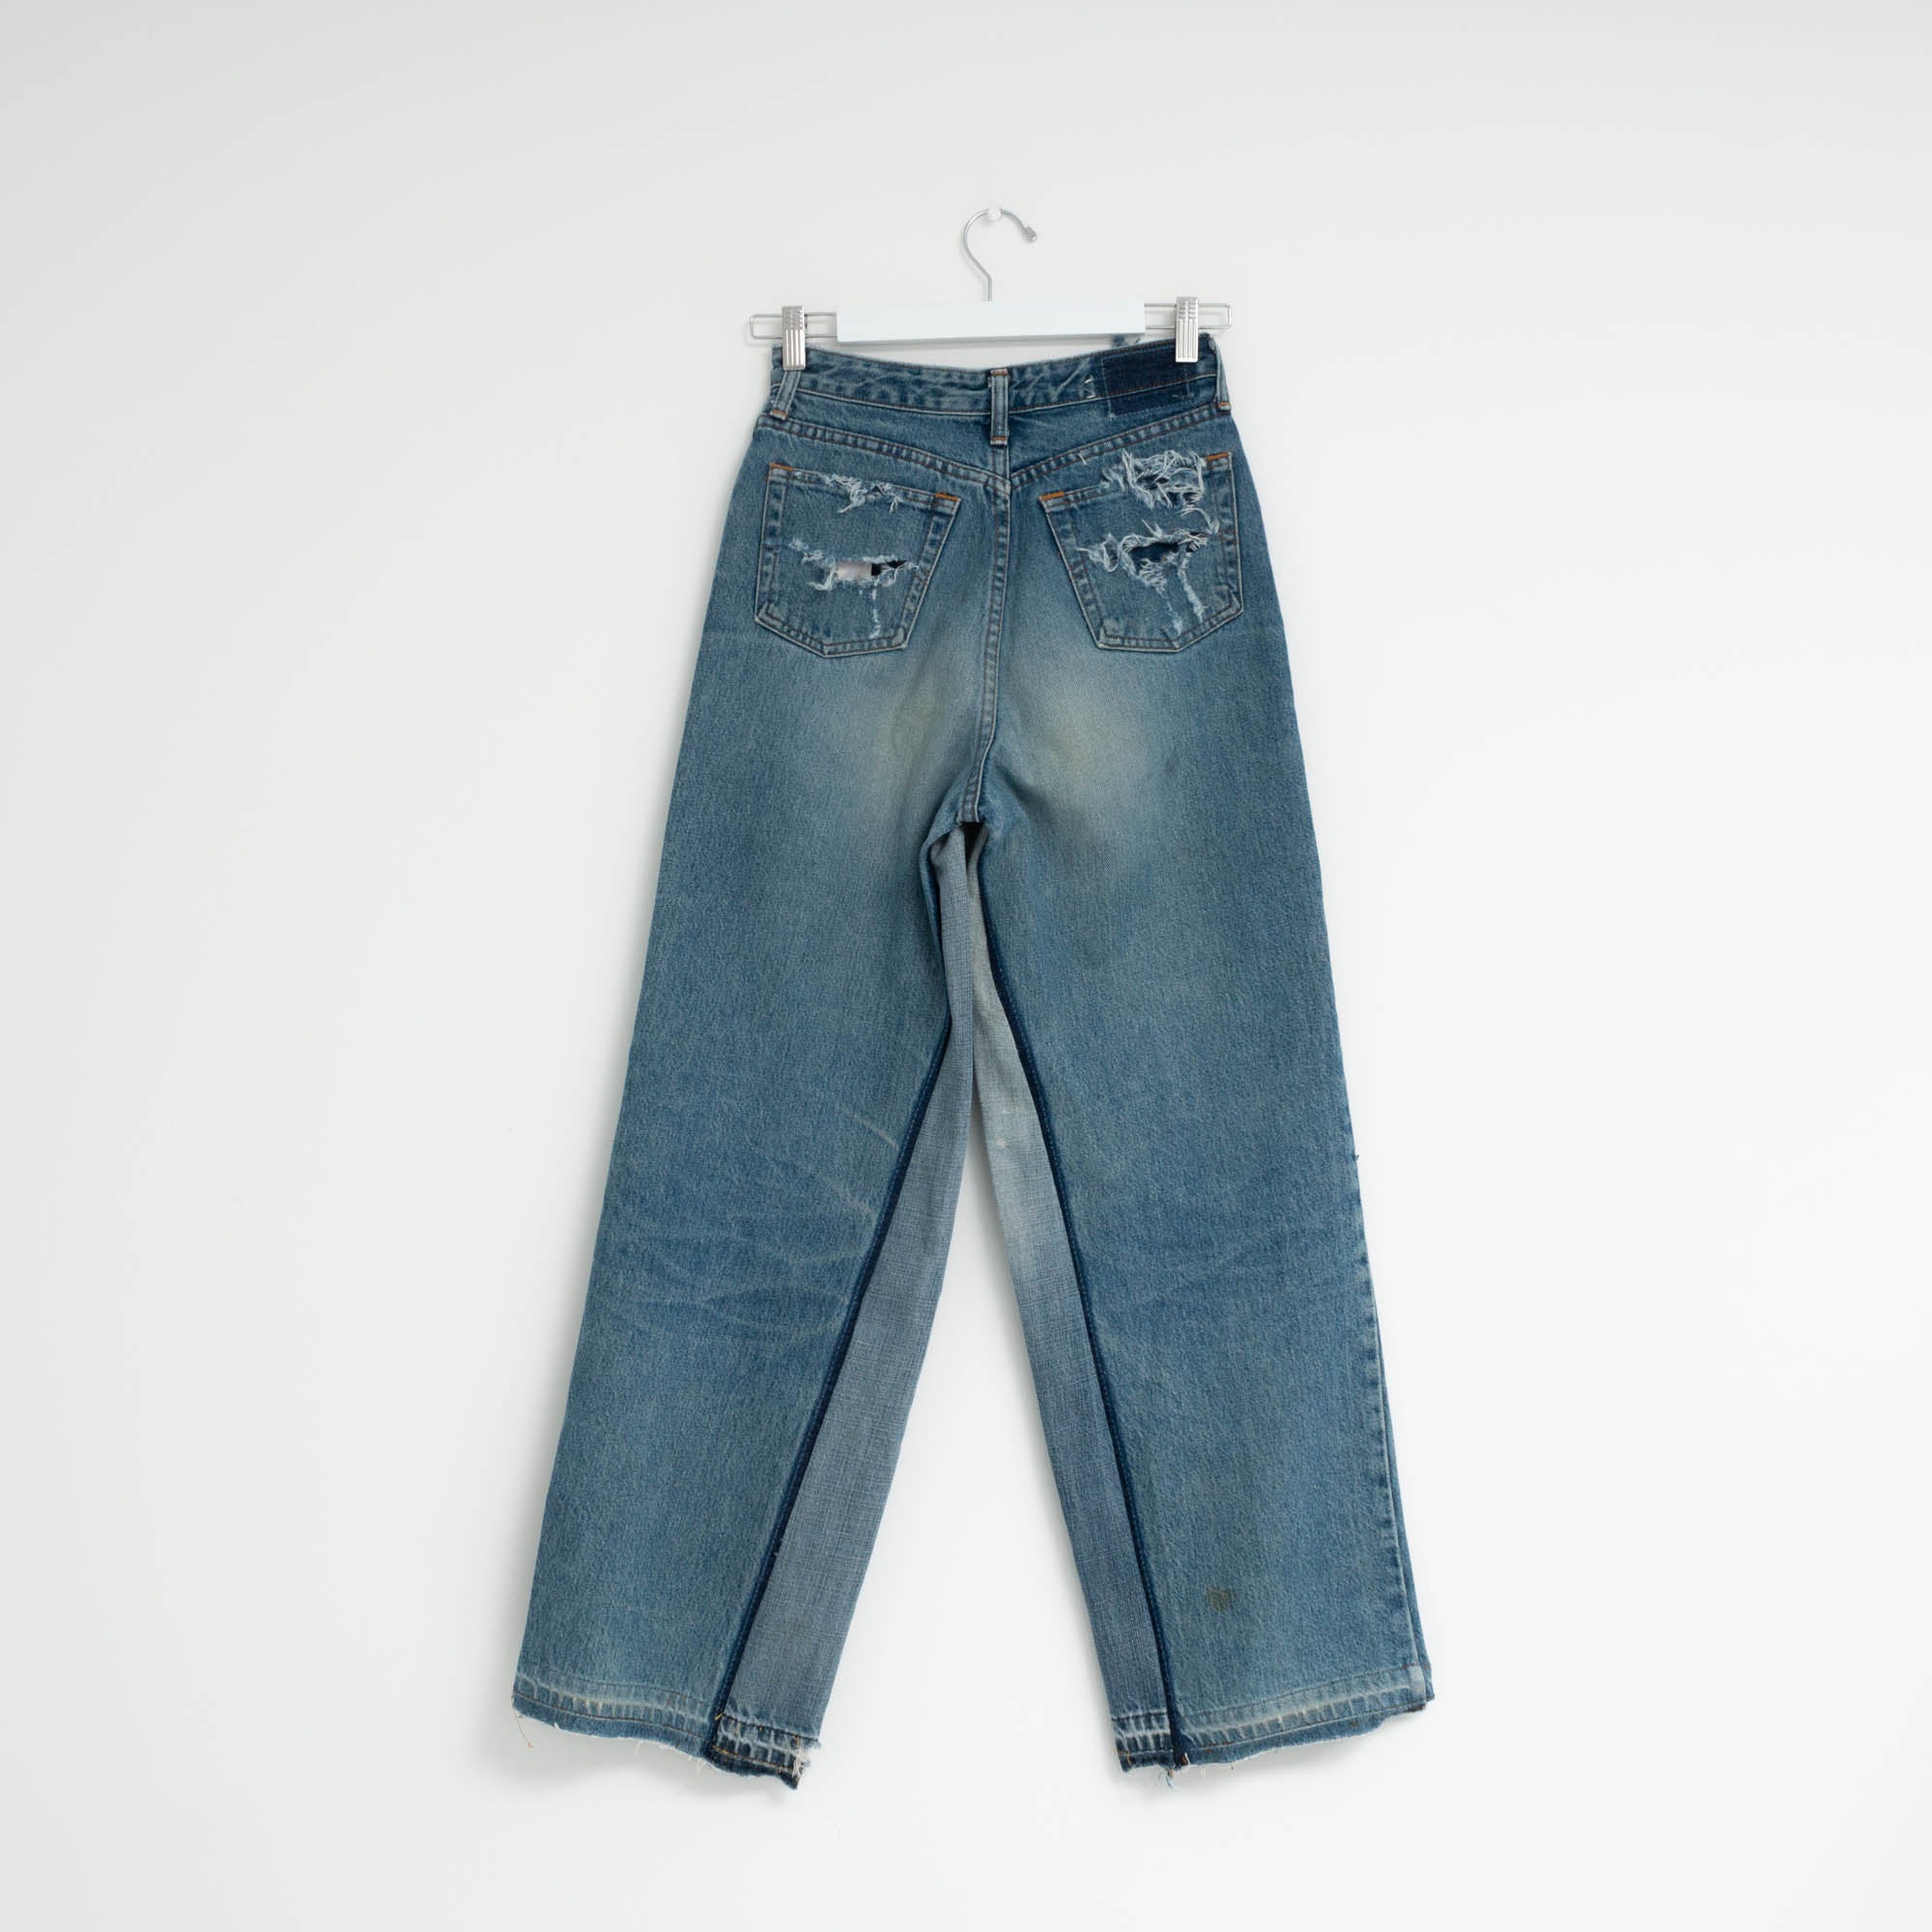 "FLARE" Jeans W26 L30